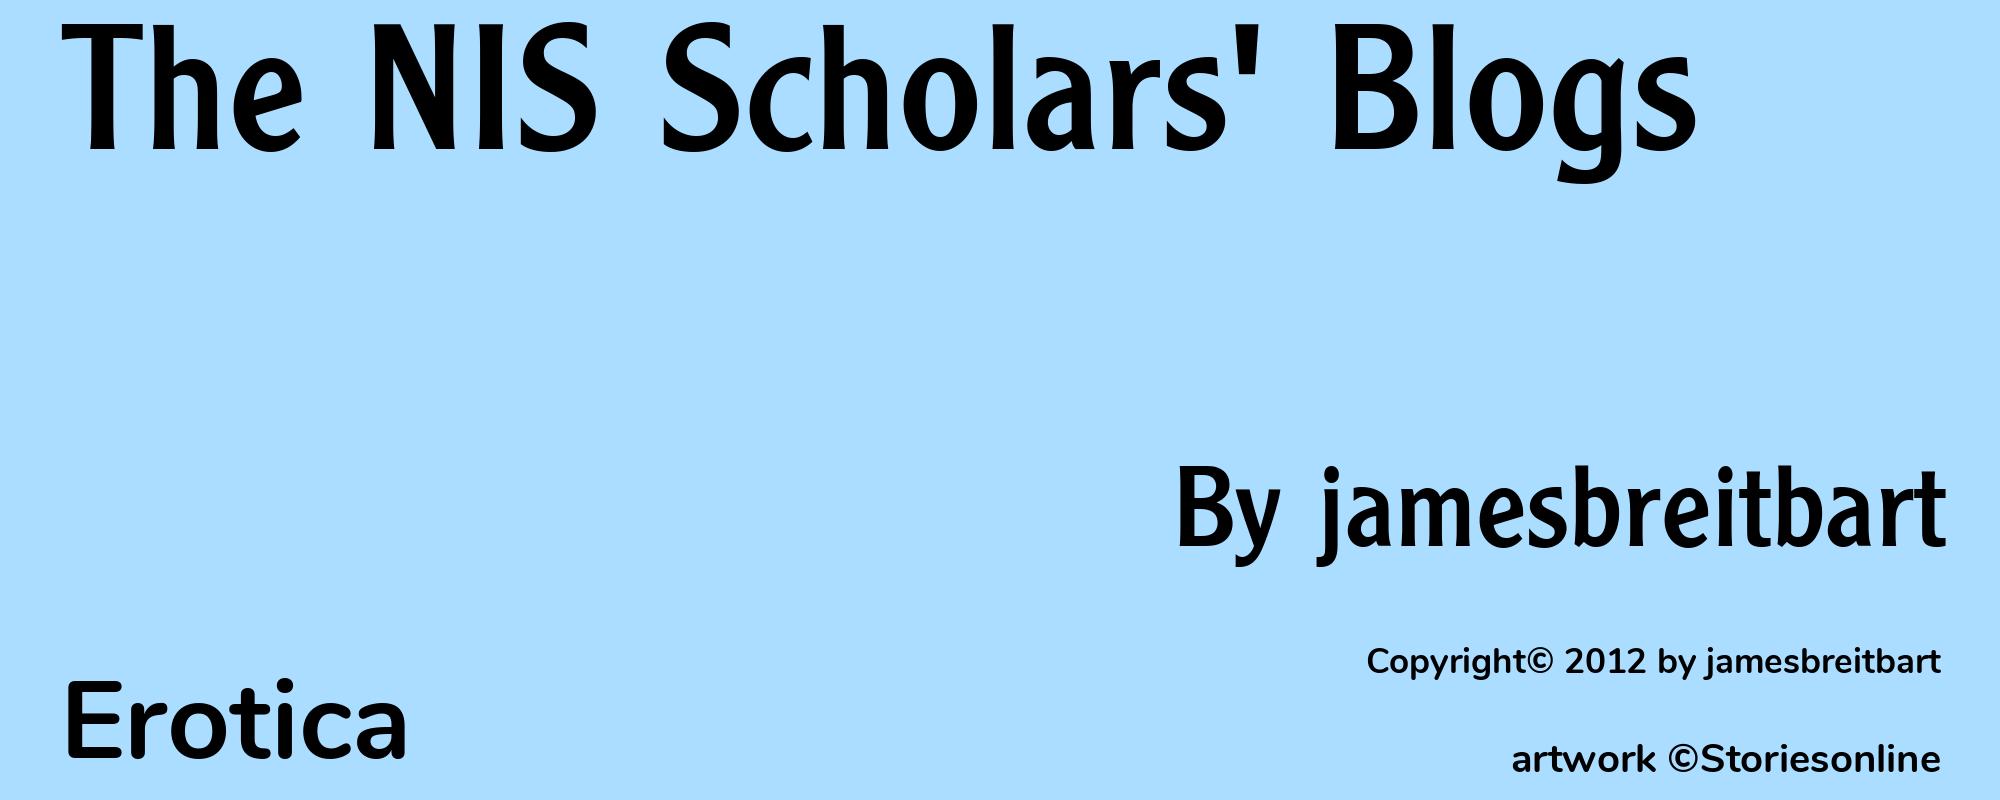 The NIS Scholars' Blogs - Cover